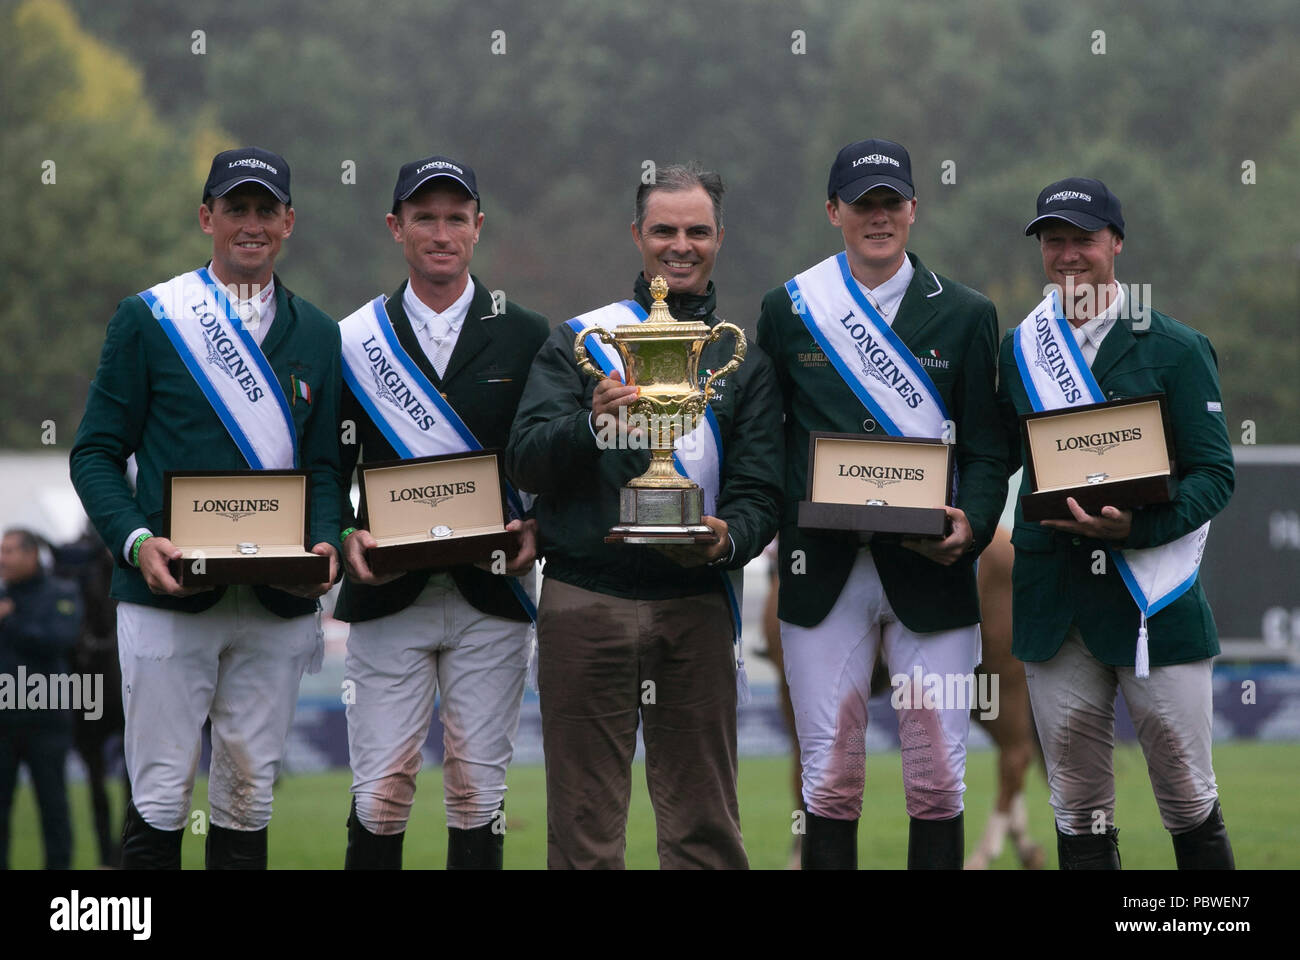 Hickstead(Britain. 30th July, 2018. Team Ireland celebrate during the awarding ceremony for the Longines FEI Jumping Nations Cup in Hickstead, Britain on July 29, 2018. Team Ireland claimed the title. Credit: Han Yan/Xinhua/Alamy Live News Stock Photo